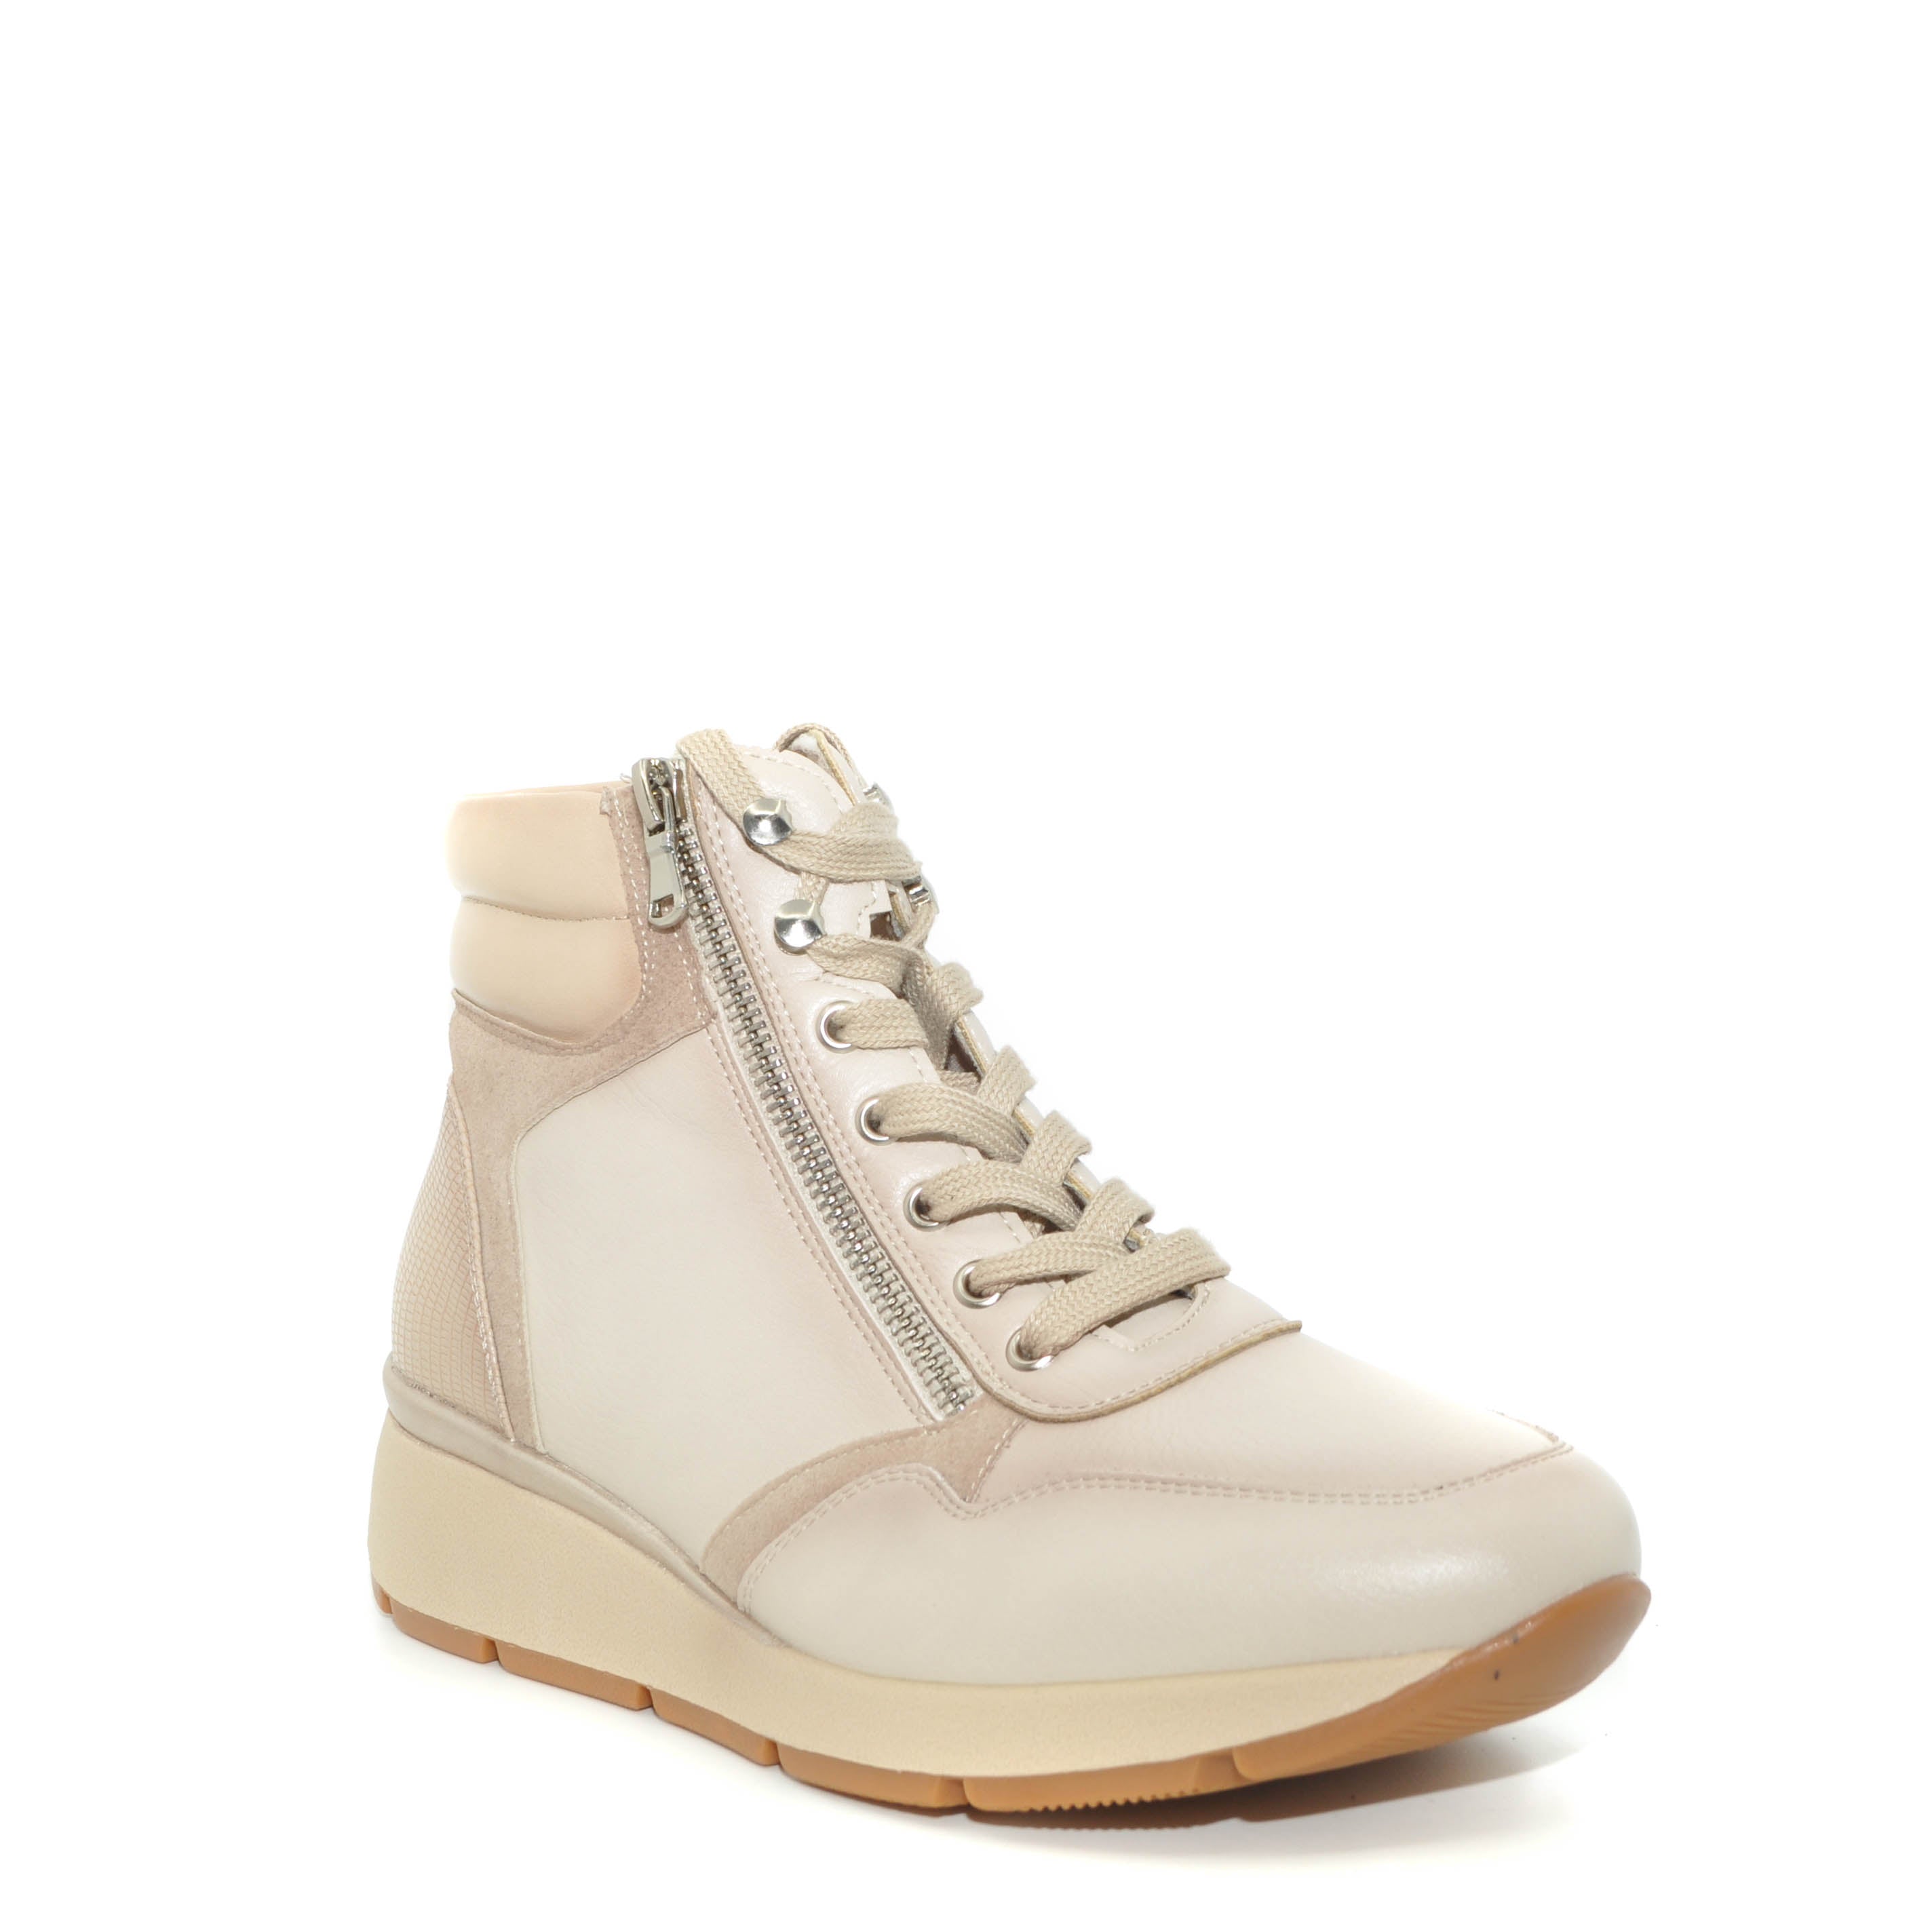 cream lace up boots women